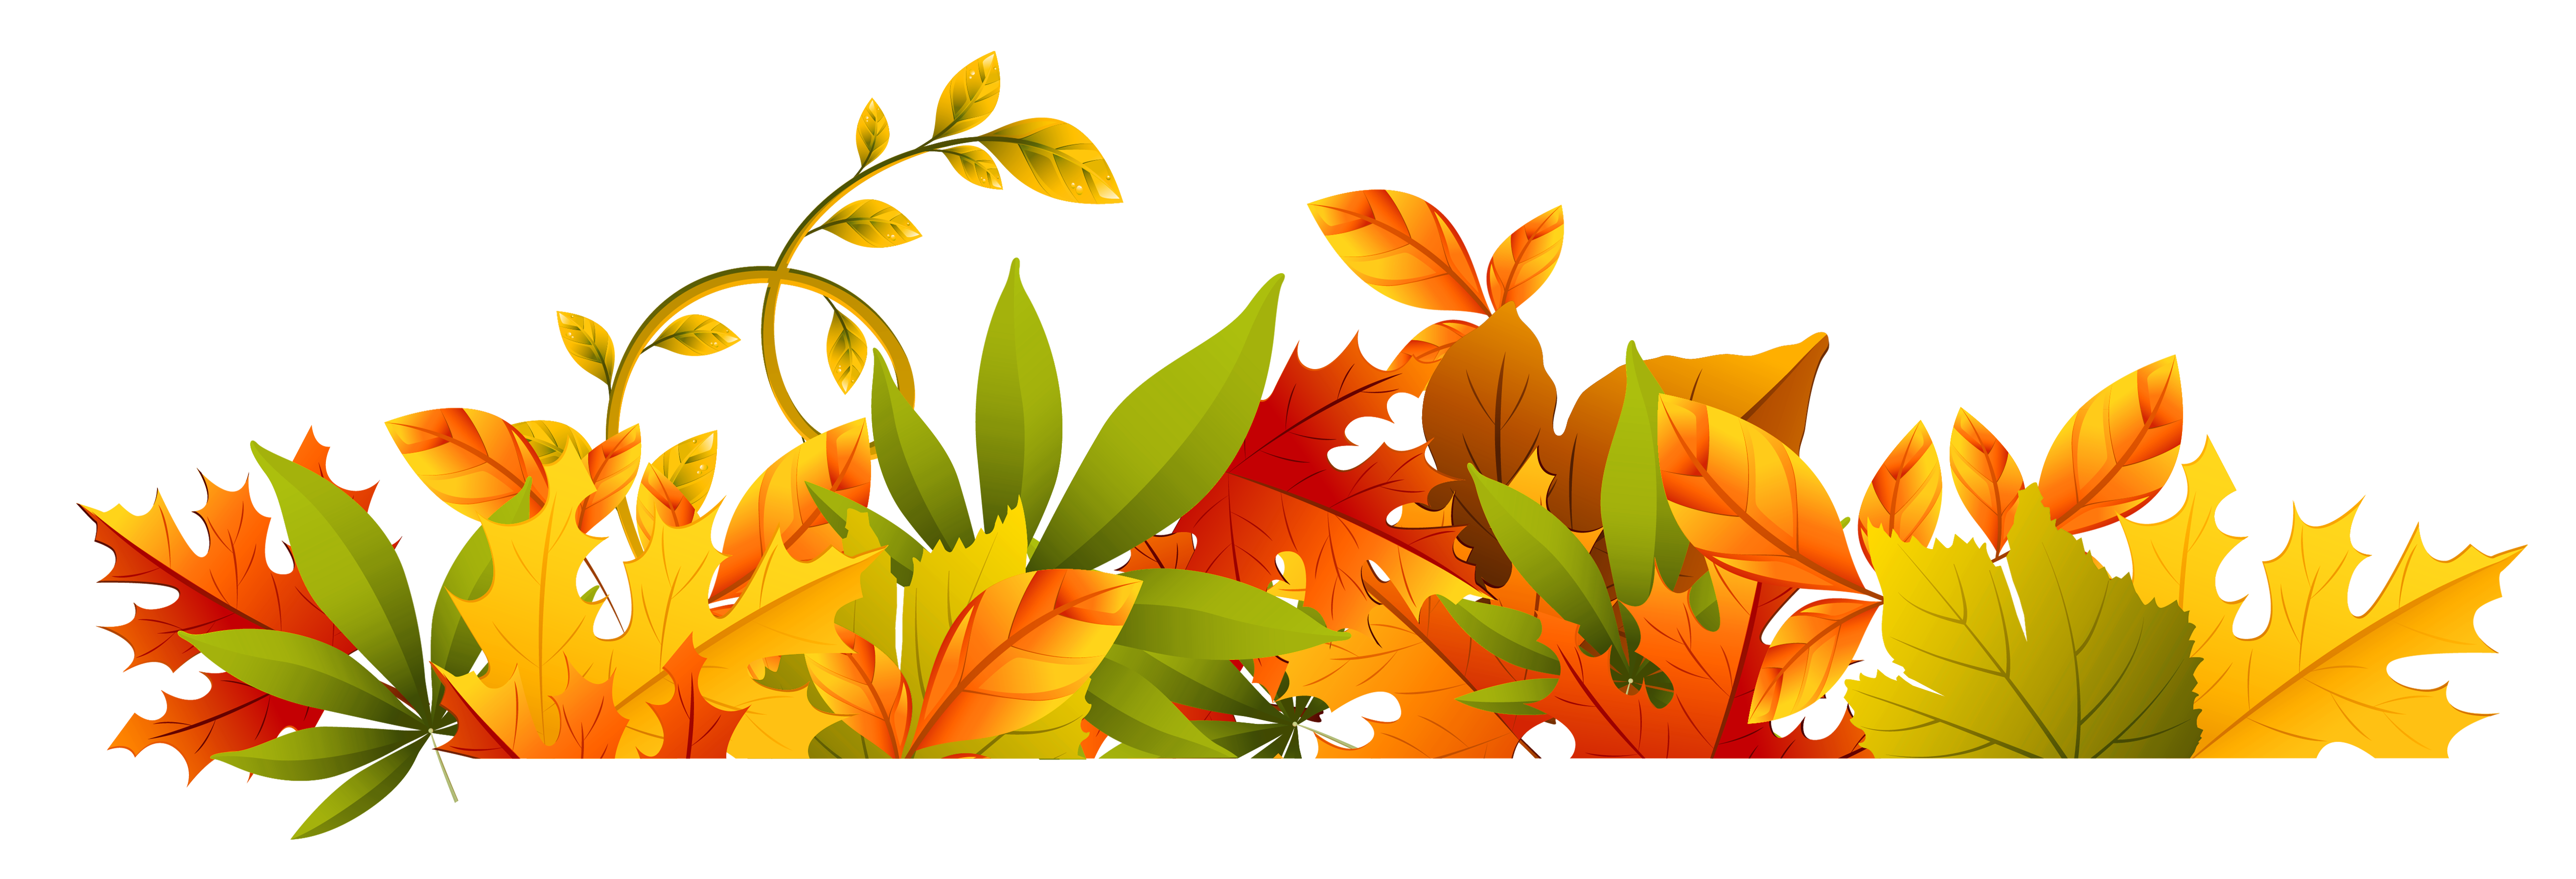 free clipart of fall flowers - photo #43